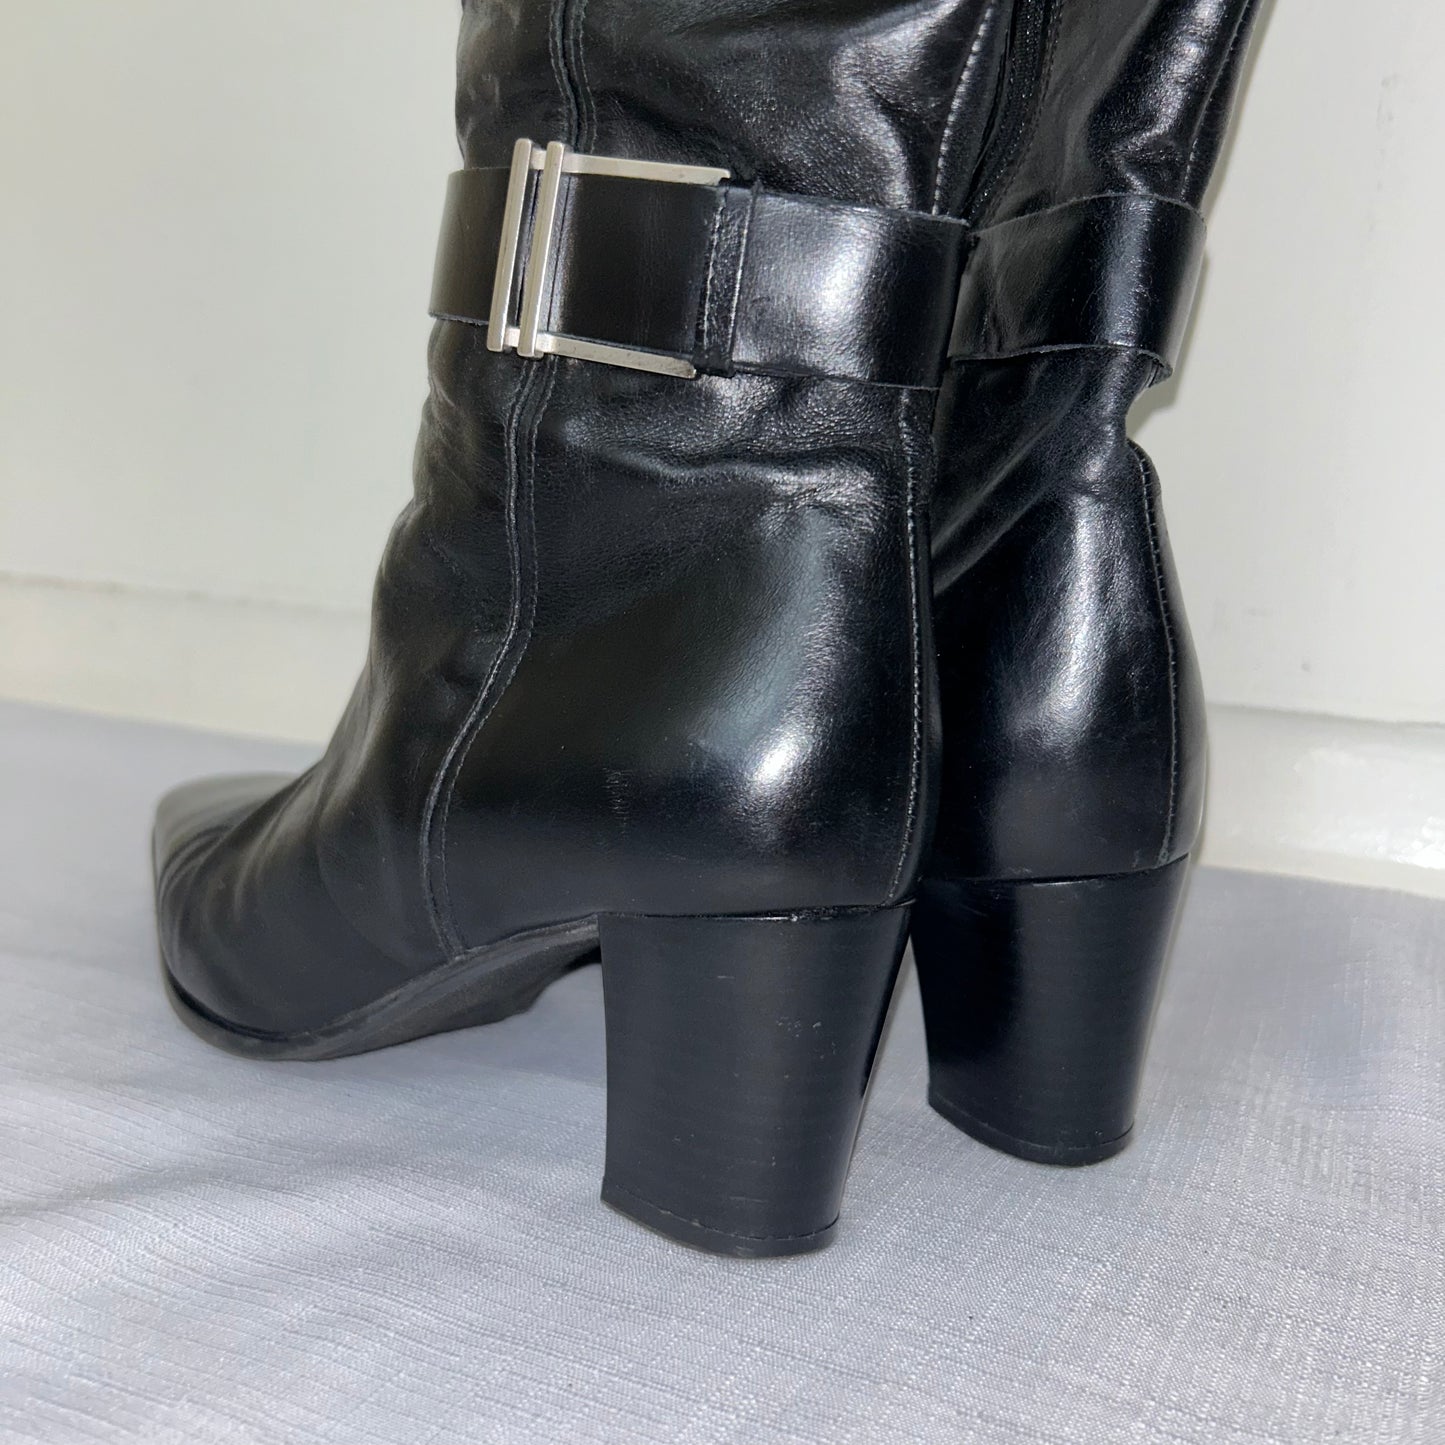 heels of black knee high leather boots with silver buckle shown on a white background